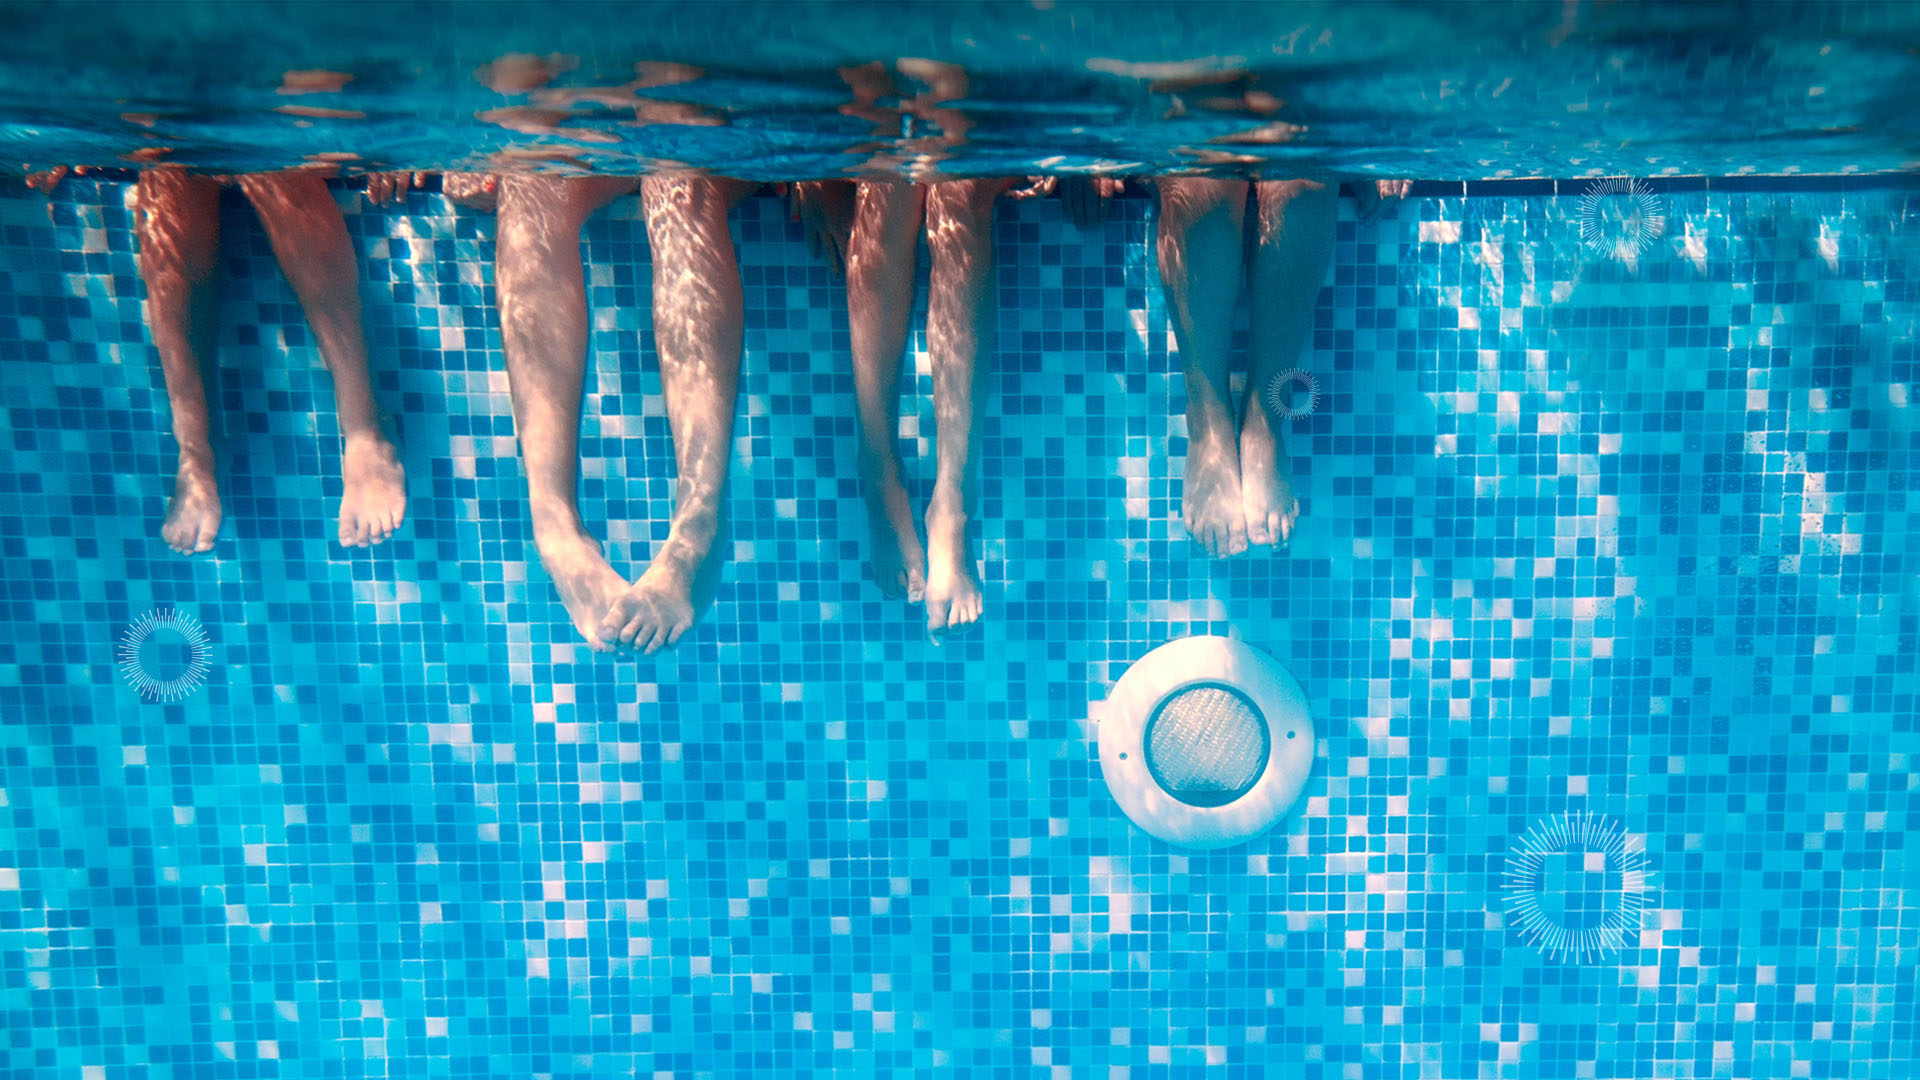 underwater view of the legs of four kids sitting on the edge of a pool with blue tile in the background